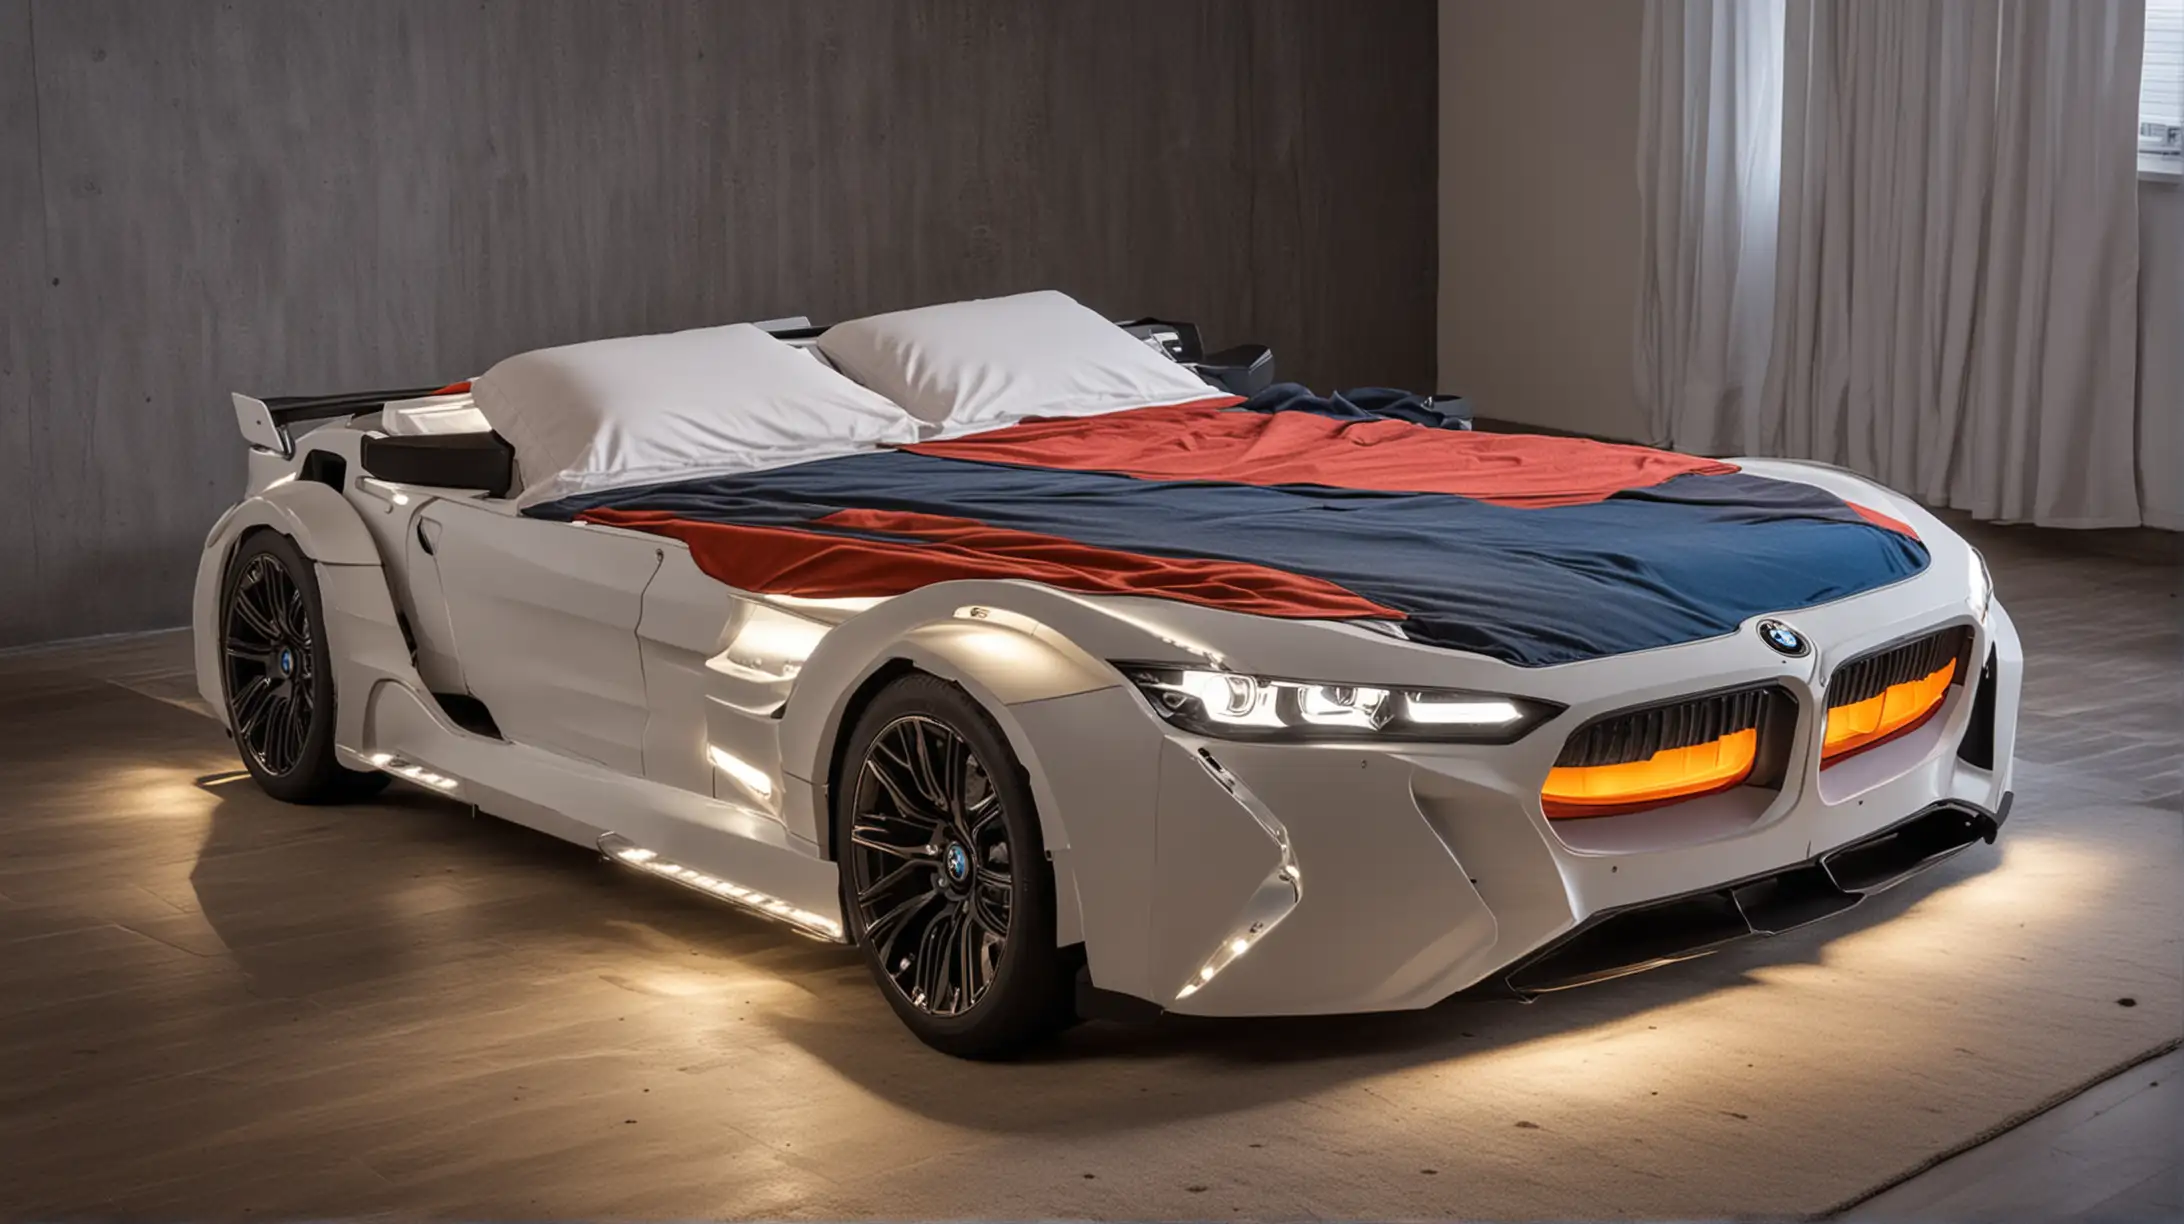 Double bed in the shape of a BMW car with headlights on and in multi-colors